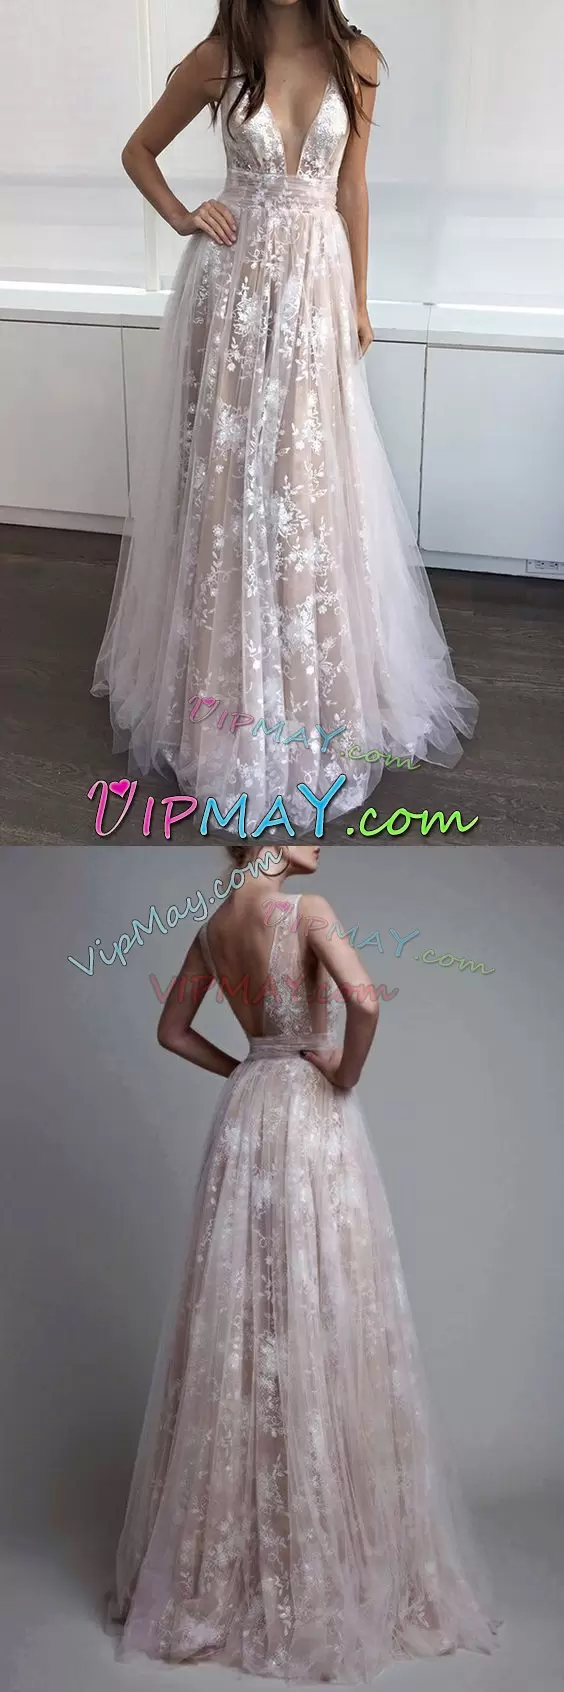 White A-line Lace V-neck Sleeveless Lace Floor Length Backless Wedding Gown